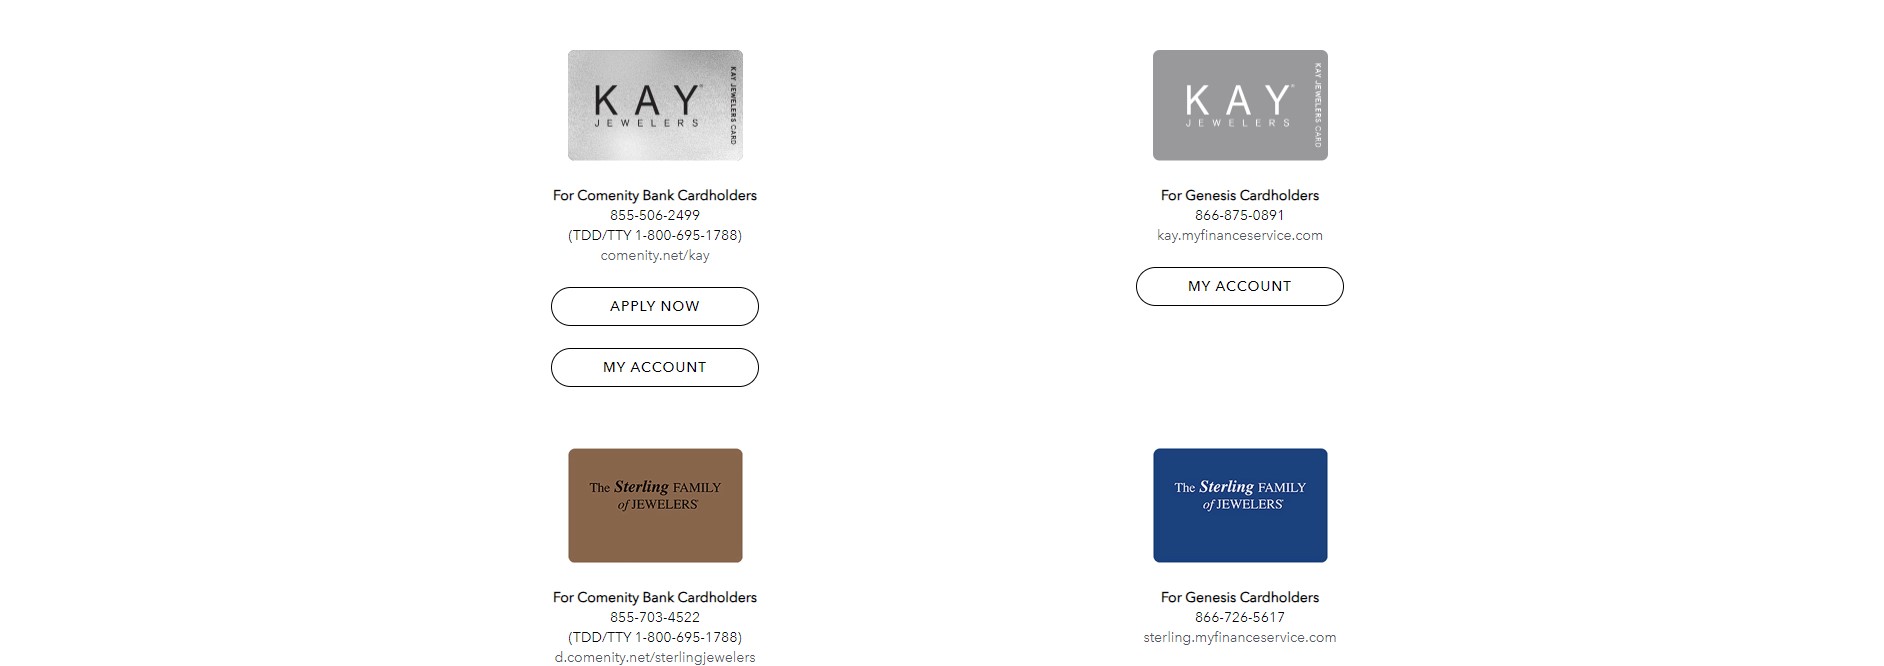 Types of Kay Jewelers Credit Cards